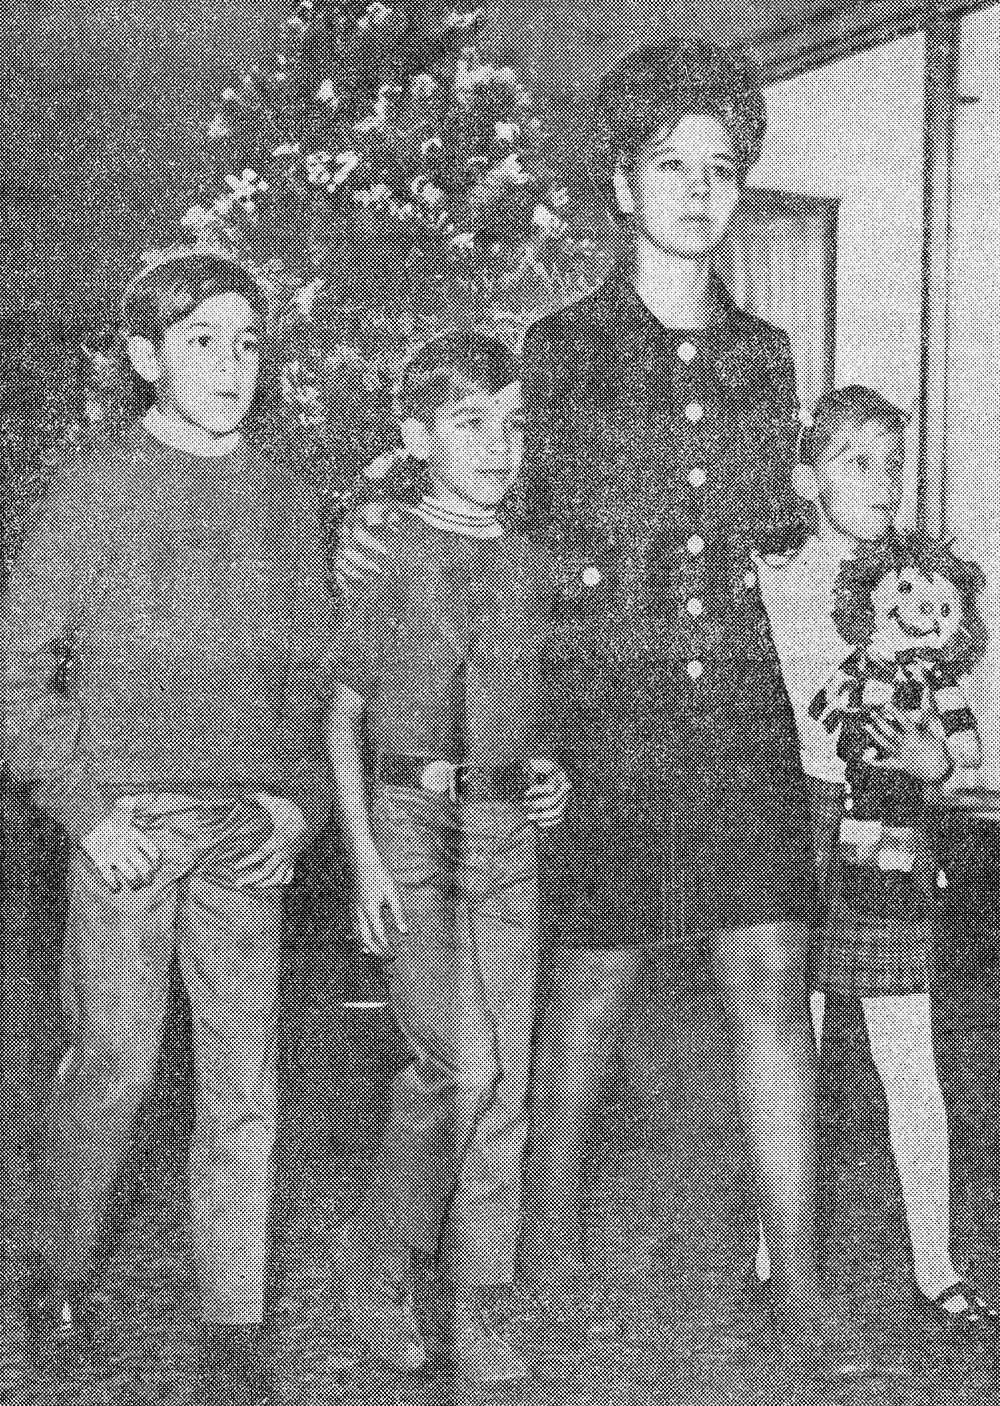 Kathleen Johnson and her three children, 1969. Credit: Dole Archives